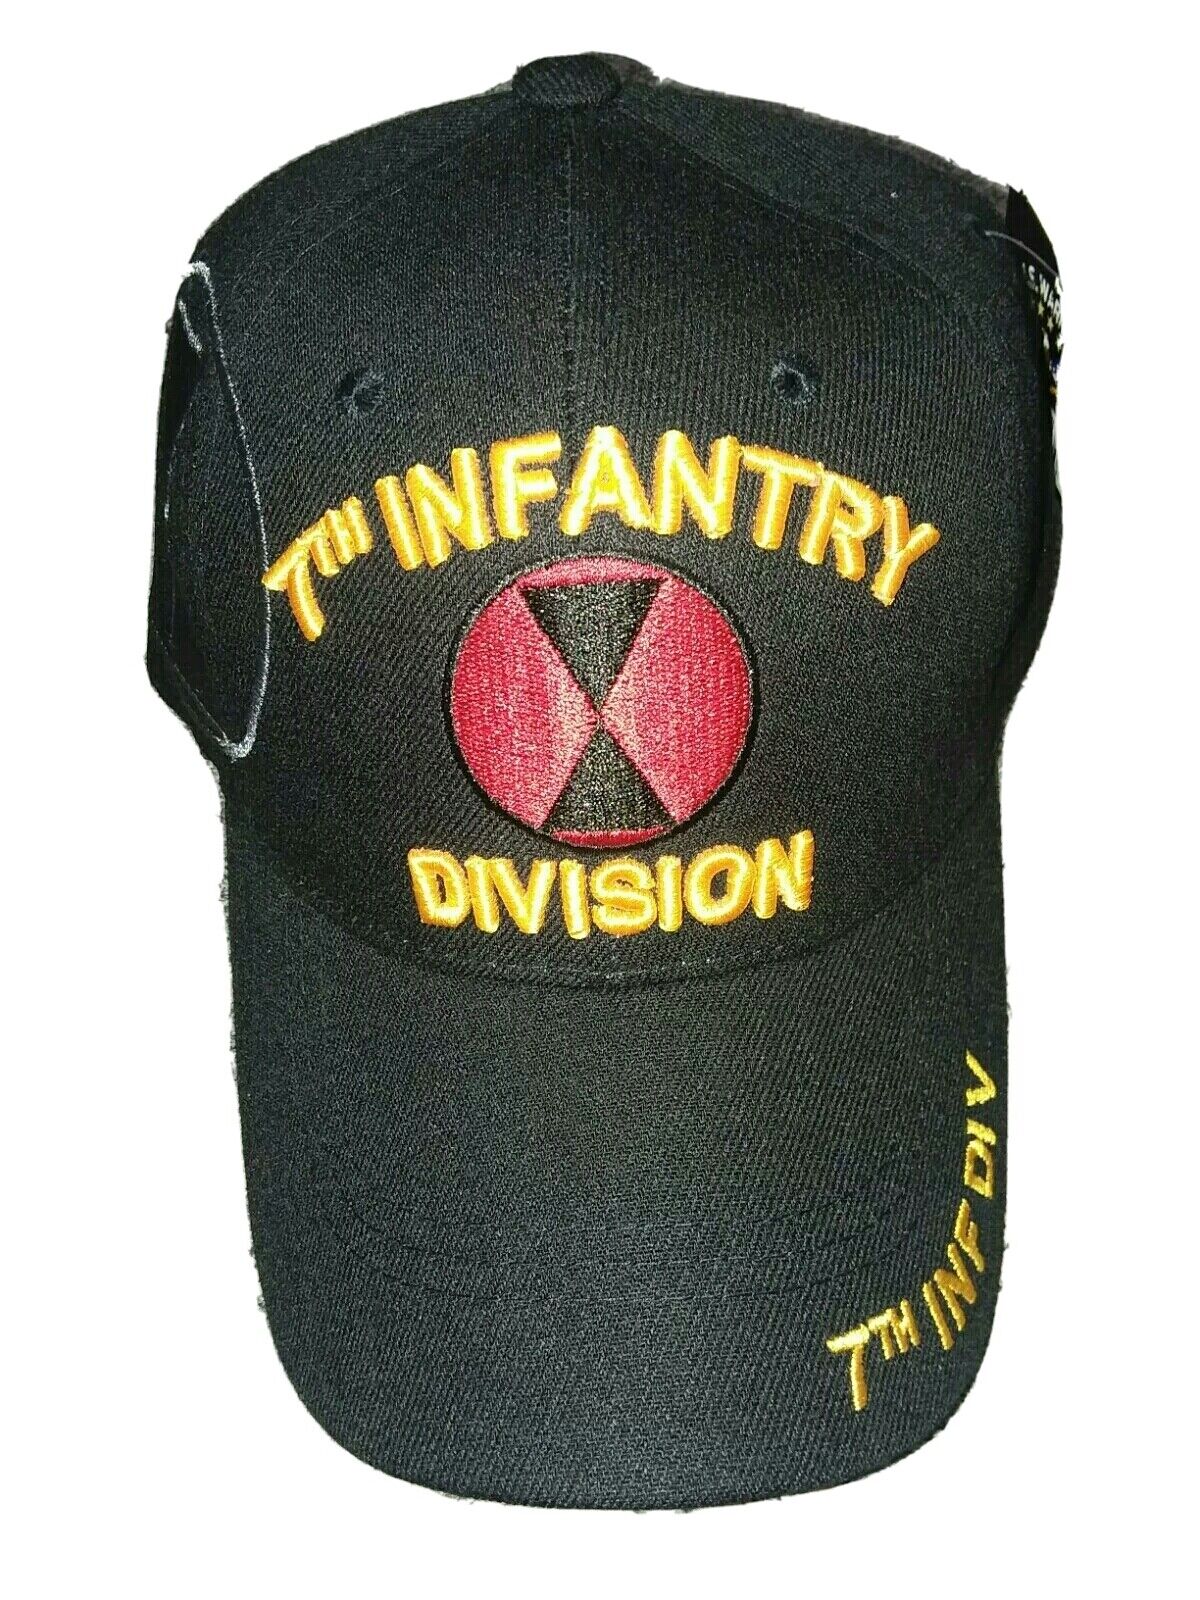 7th Infantry Division Black Army Baseball Cap 7th ID Military Embroidered Hat